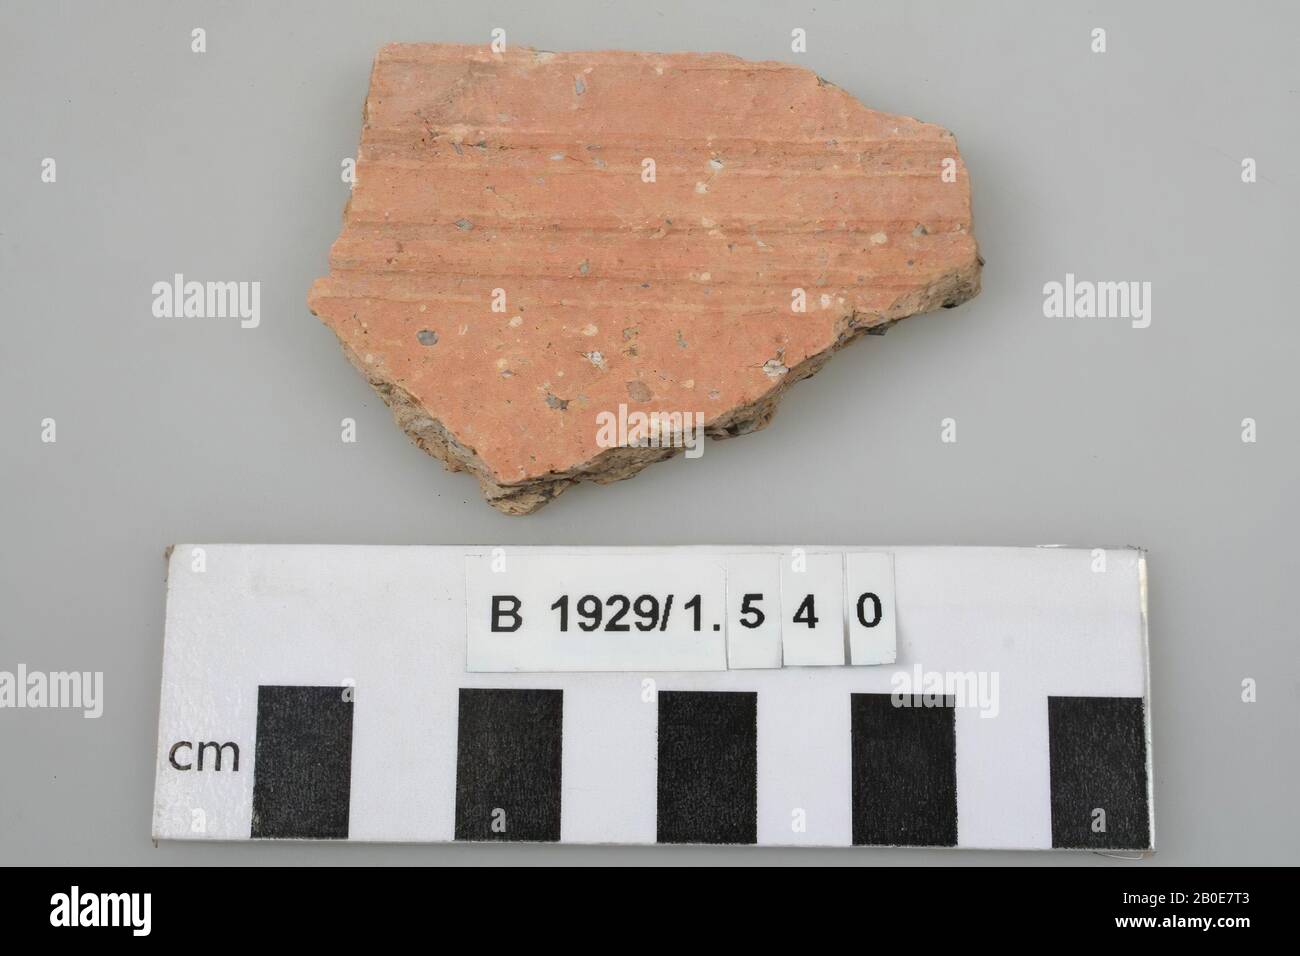 A wall shard with grooves, crockery, earthenware, B 7.2 cm, Palestine Stock Photo